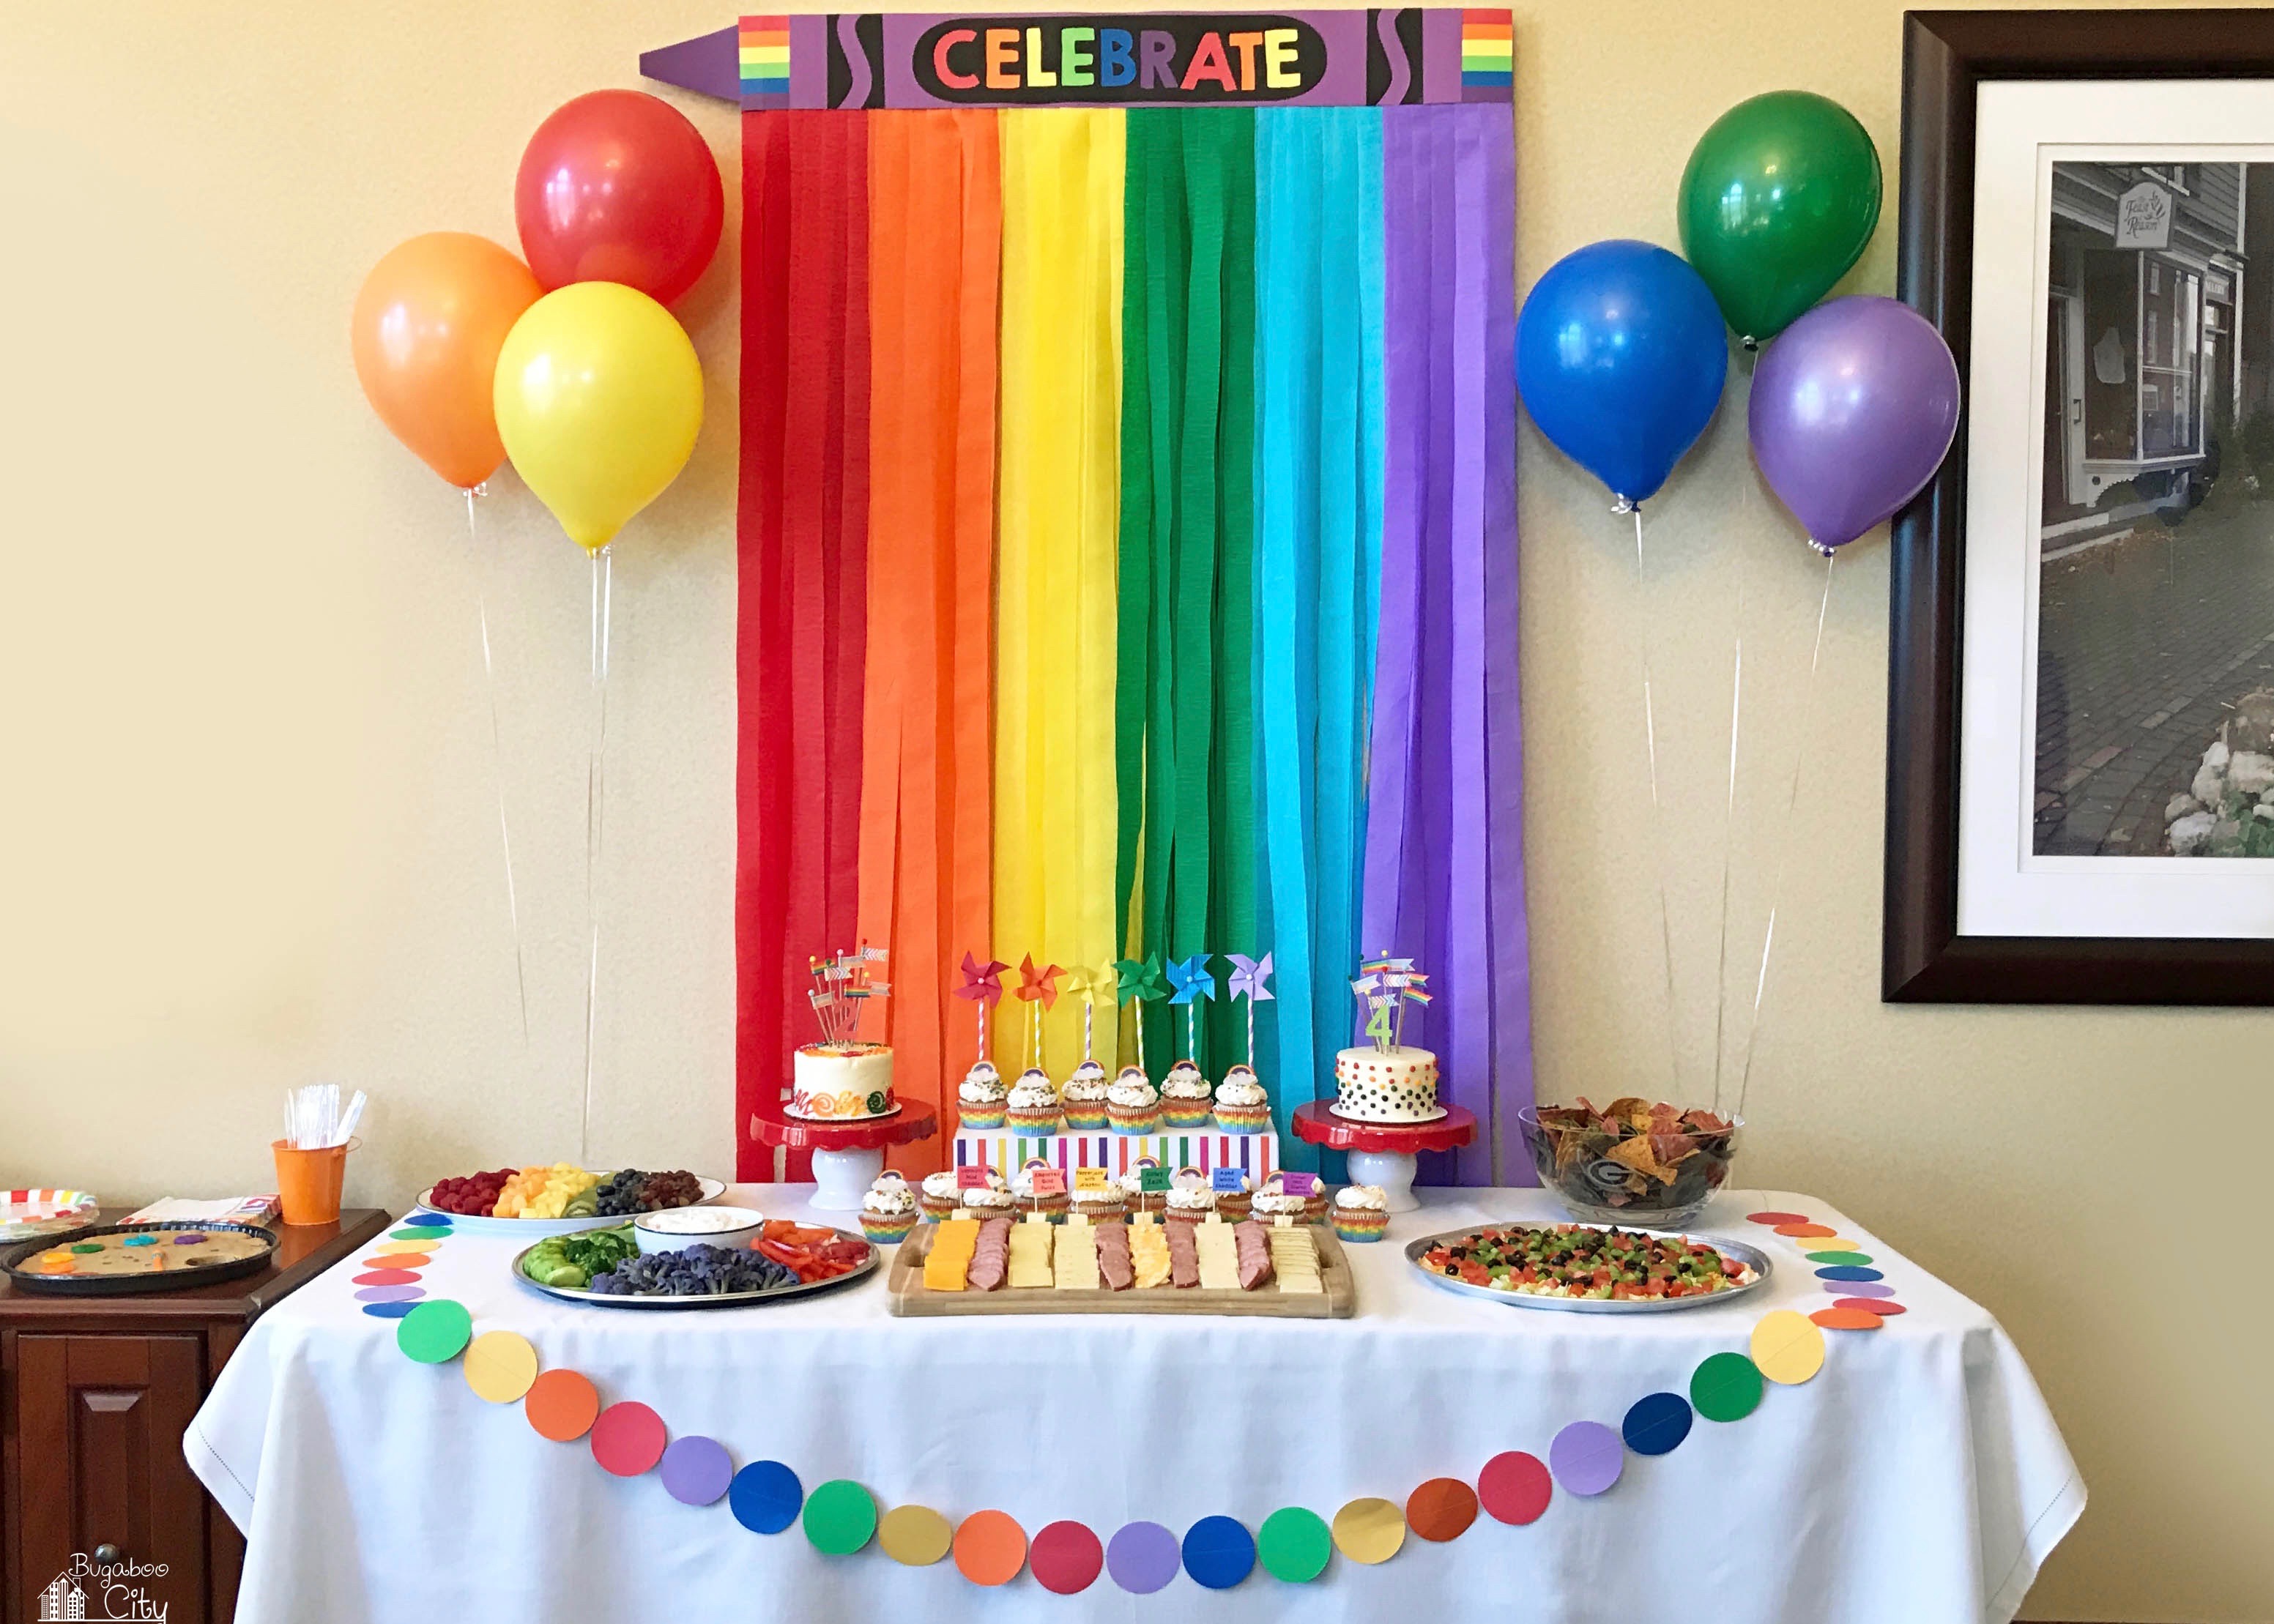  A rainbow of streamers serve as backdrop for a birthday party decorated in rainbow theme with personalized touches like a name banner, rainbow balloons, and a cake with rainbow sprinkles.